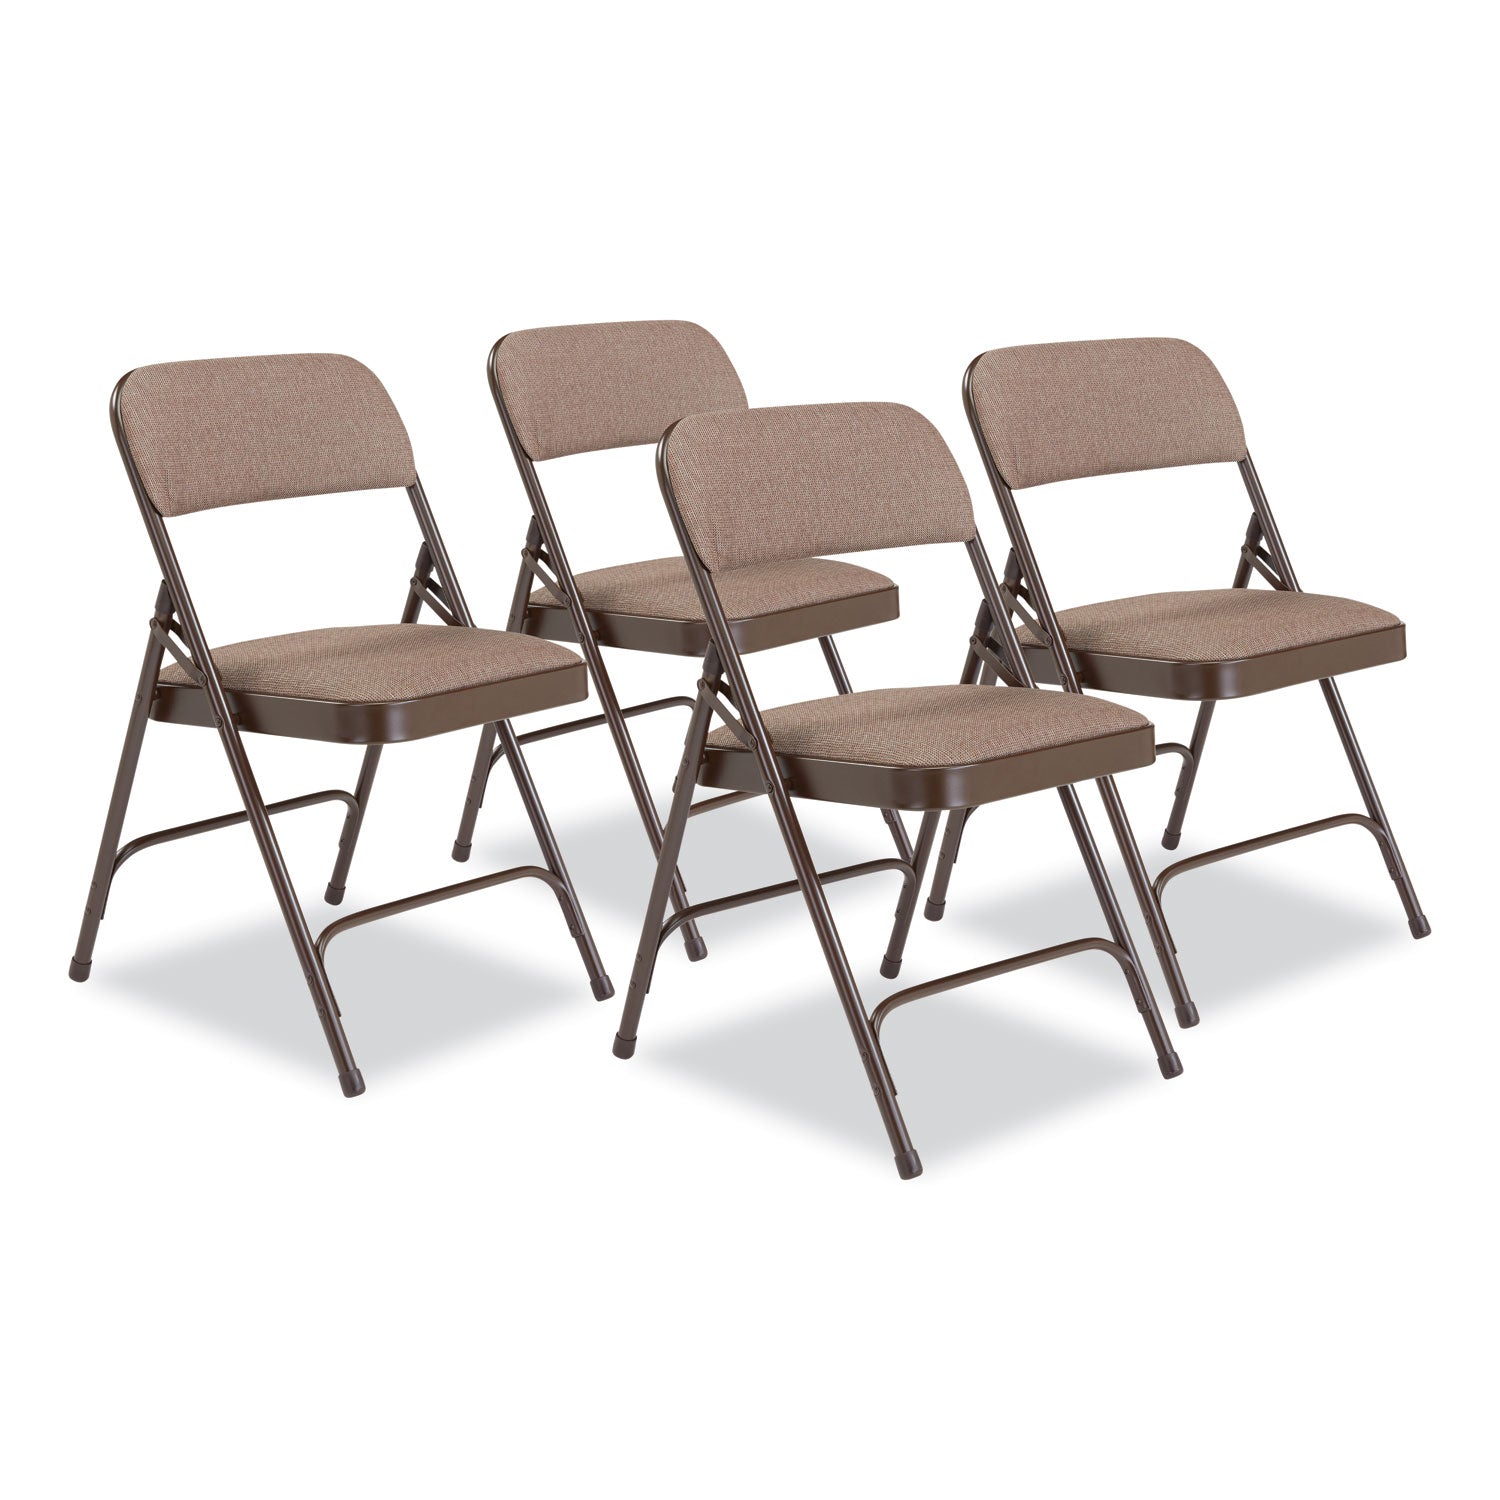 2200-series-fabric-dual-hinge-premium-folding-chair-supports-500-lb-walnut-seat-back-brown-base4-ctships-in-1-3-bus-days_nps2207 - 1